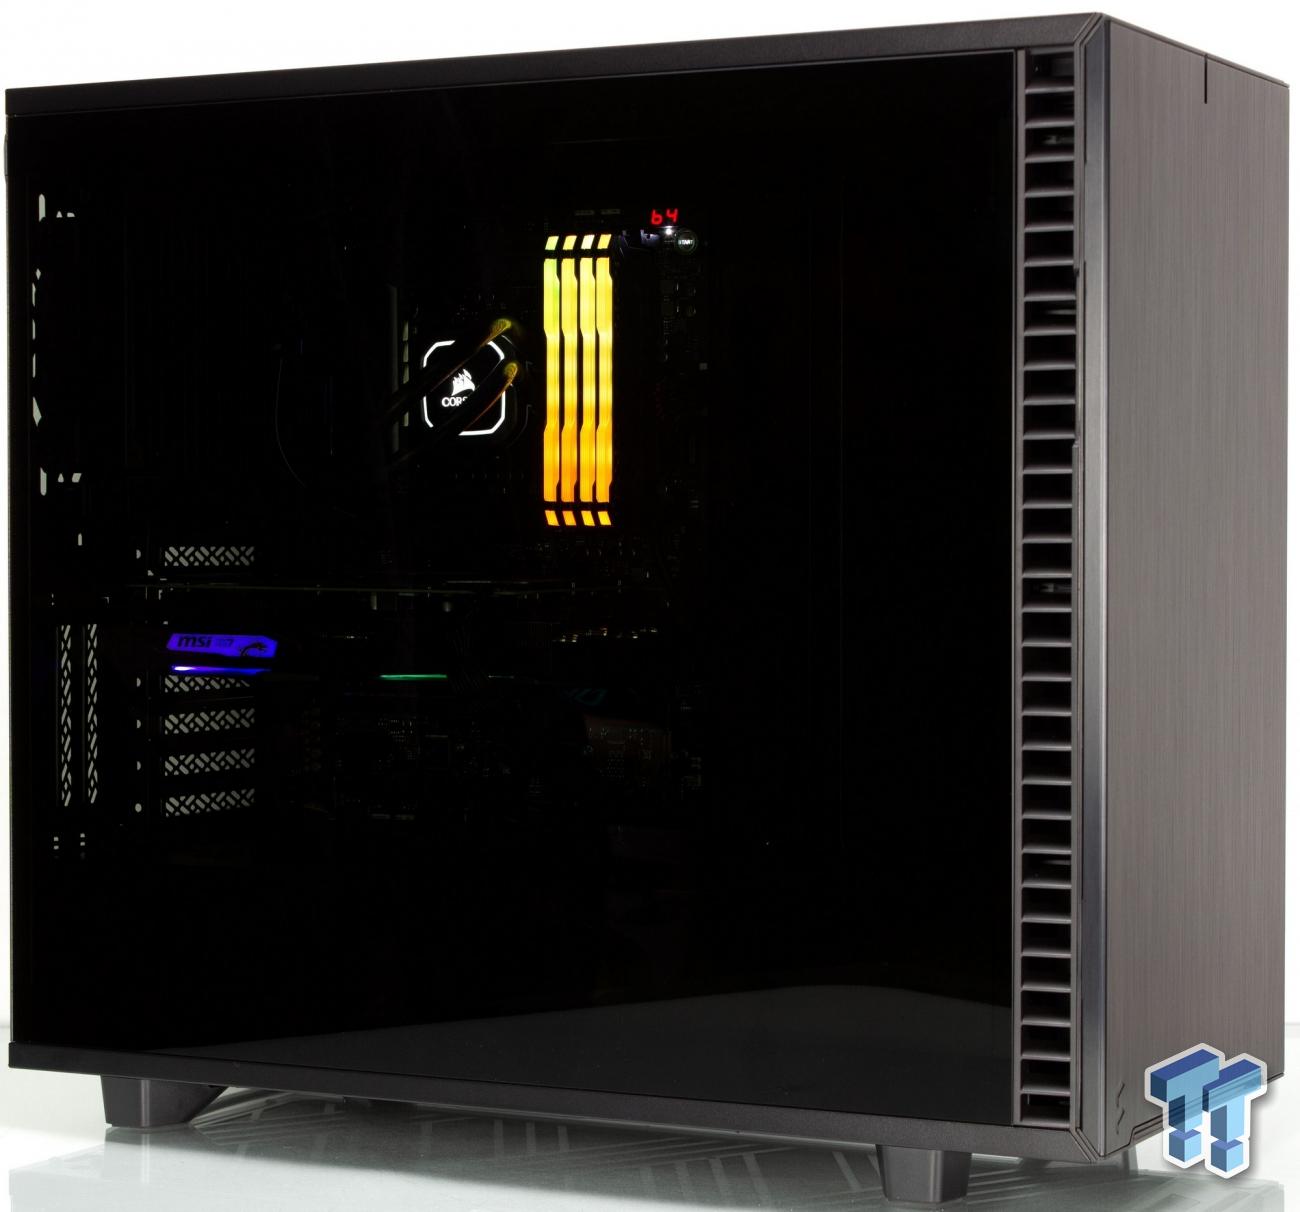 Beauty Defined!, Fractal Design North White TG Gaming PC Build